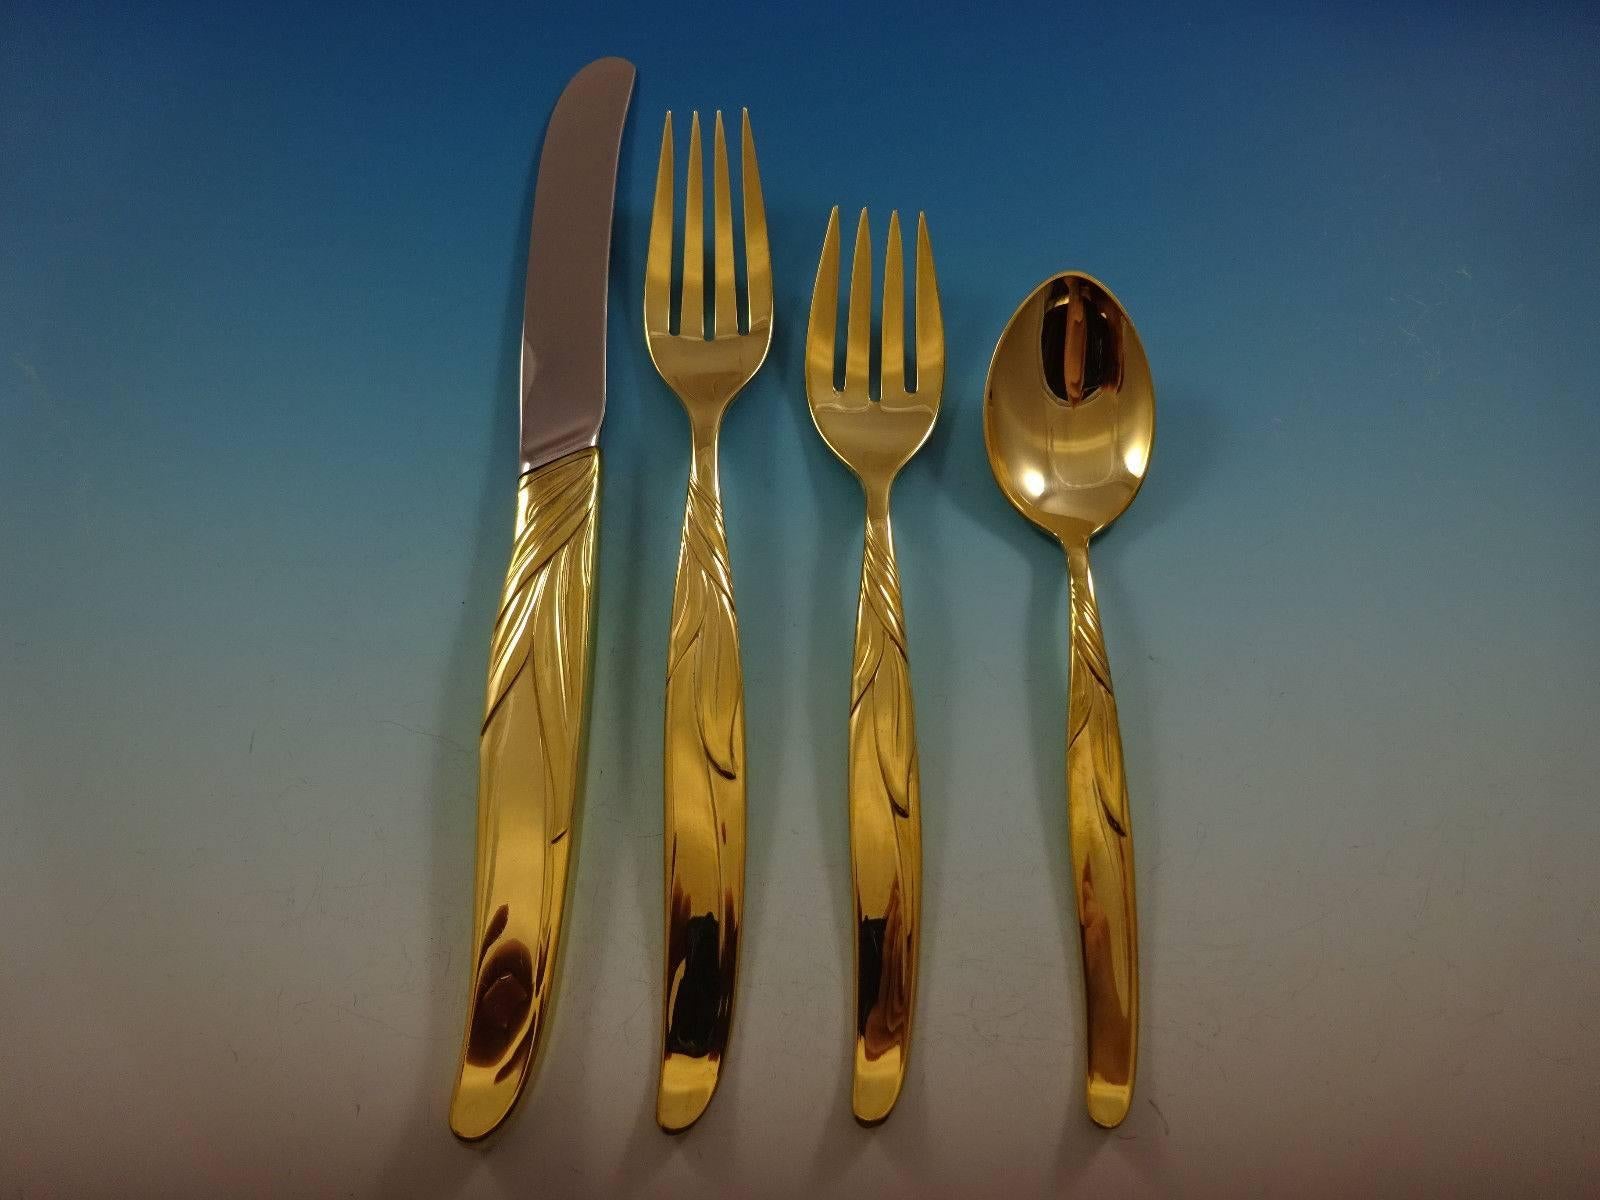 Gorgeous southwind gold by Towle sterling silver flatware set - 48 pieces. Gold flatware is on trend and makes a bold statement on your table. 

This set is vermeil (completely gold-washed) and includes:
 
12 Knives, 8 7/8